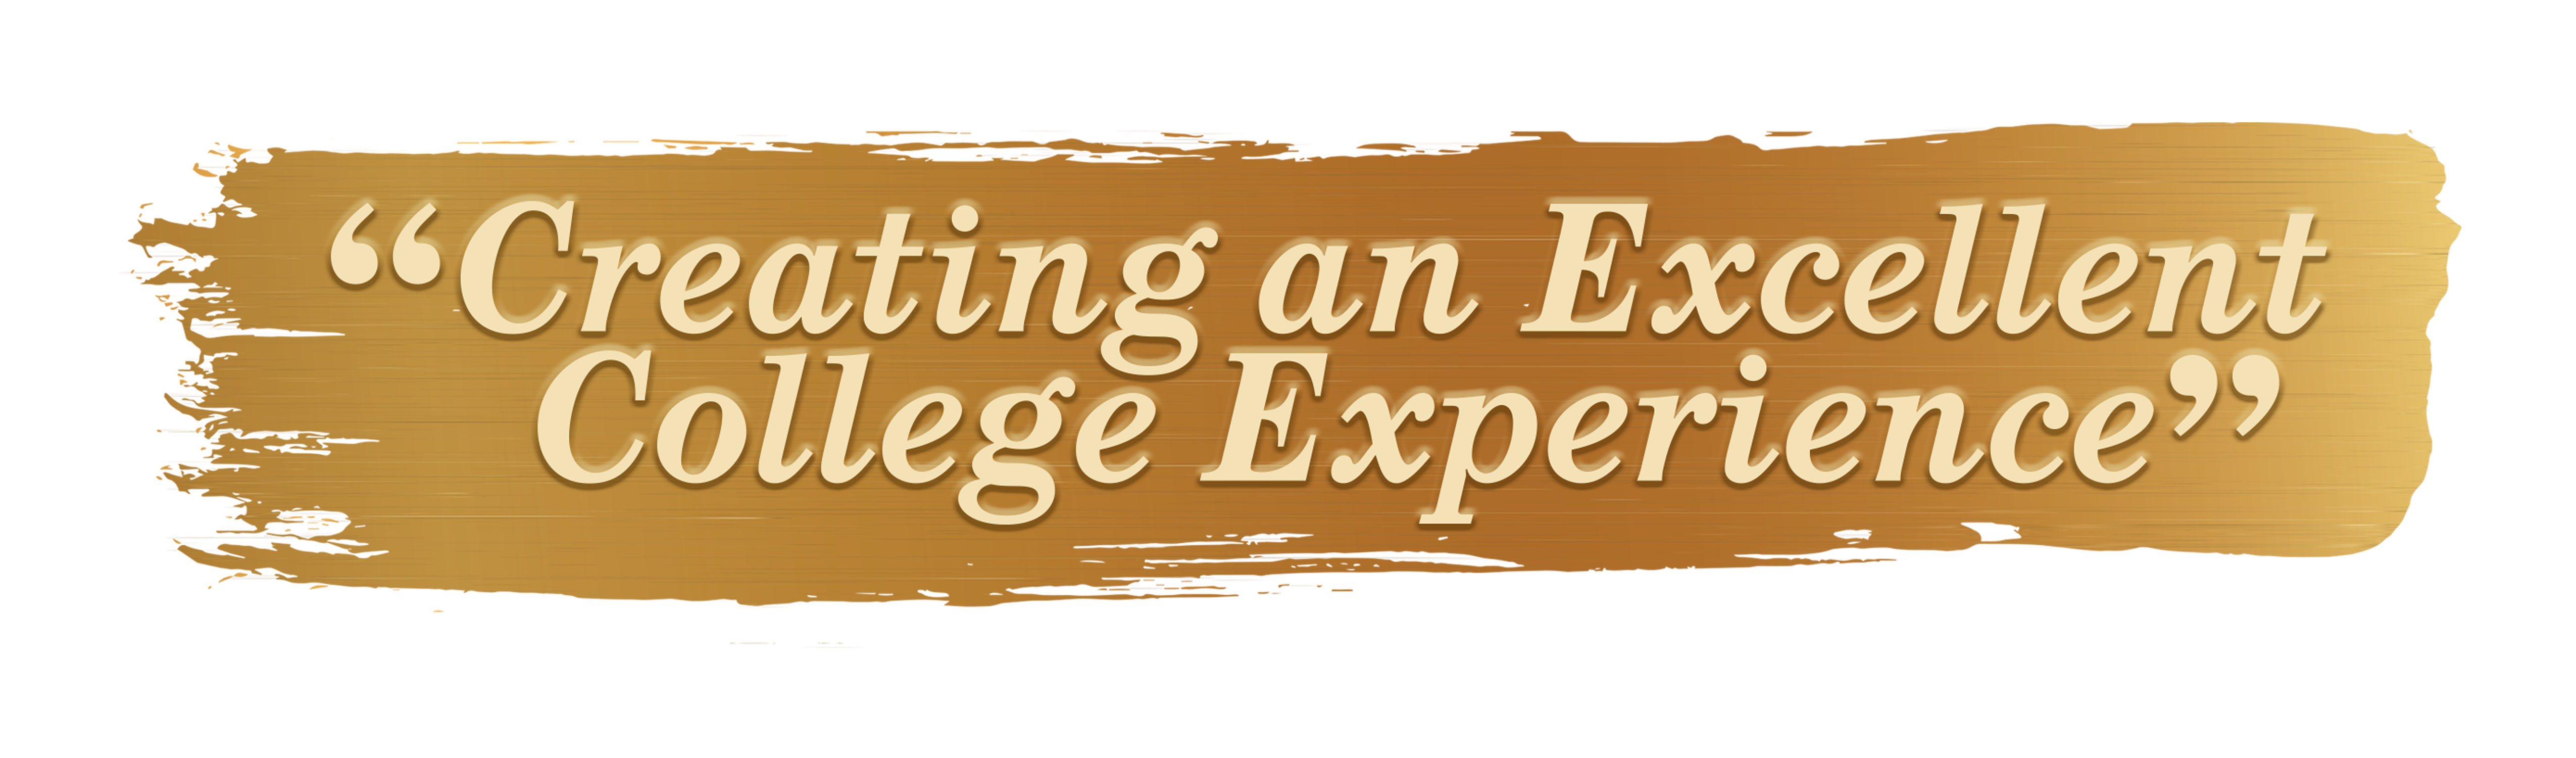 creating an excellent college experience